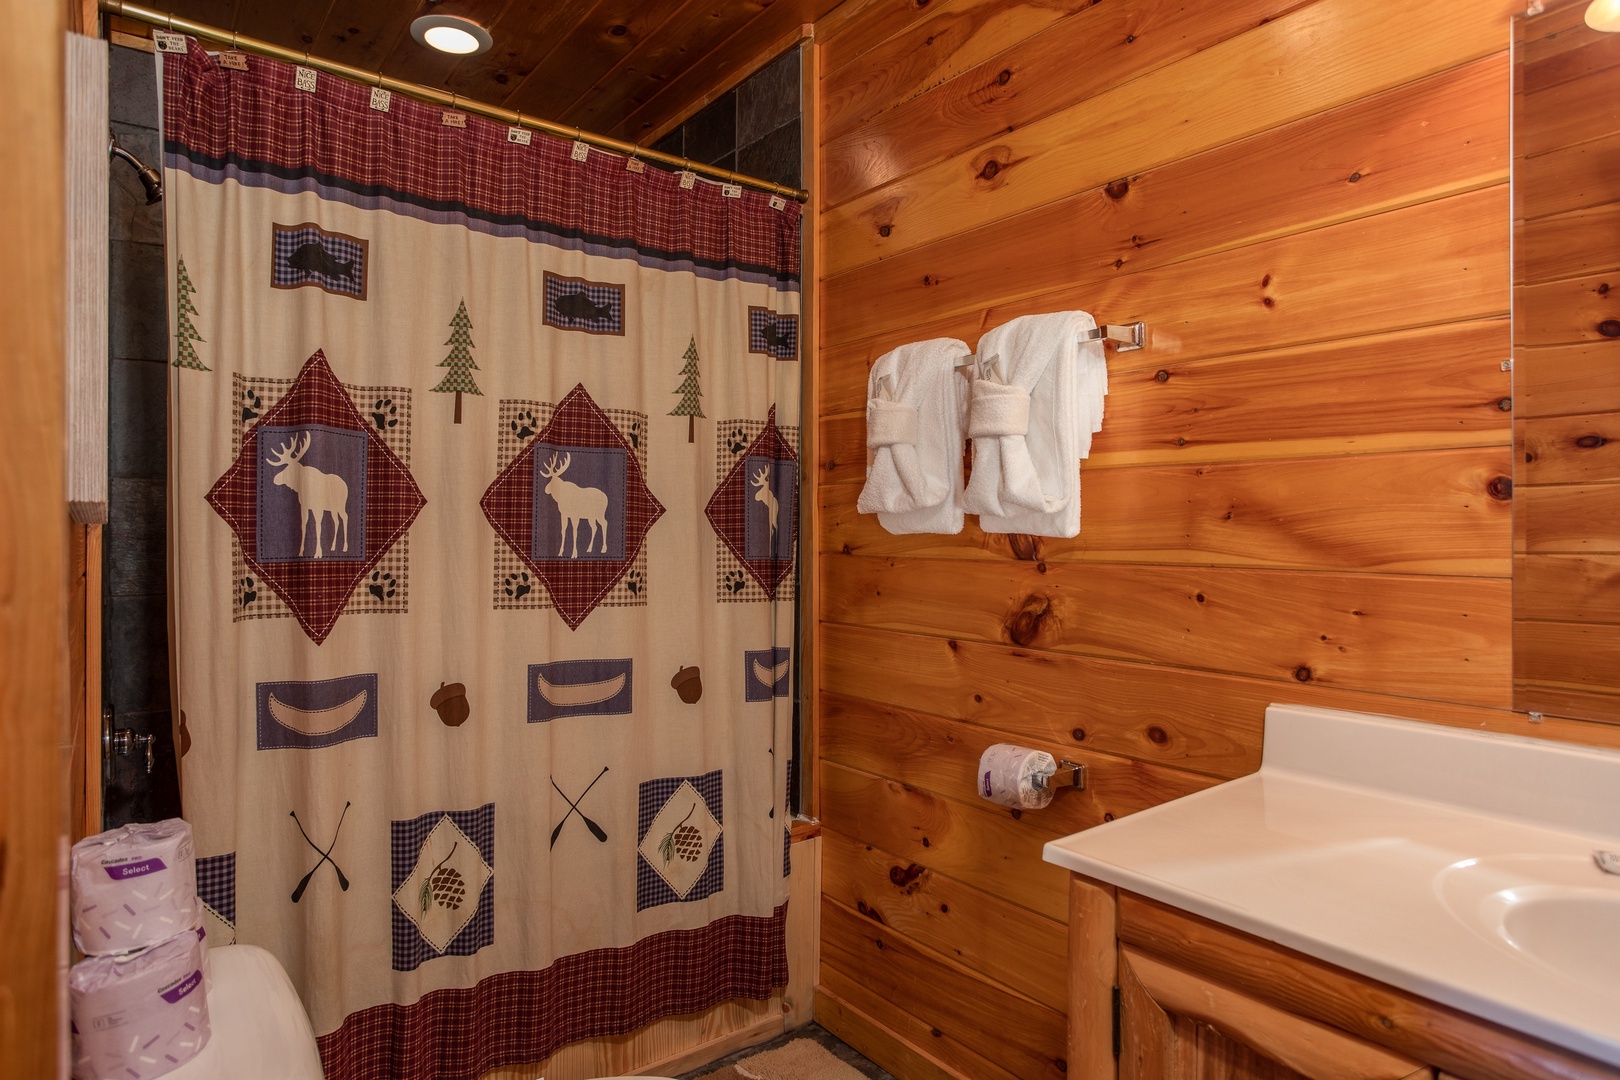 Bathroom with a tub and shower at 5 Star View, a 3 bedroom cabin rental located in Gatlinburg